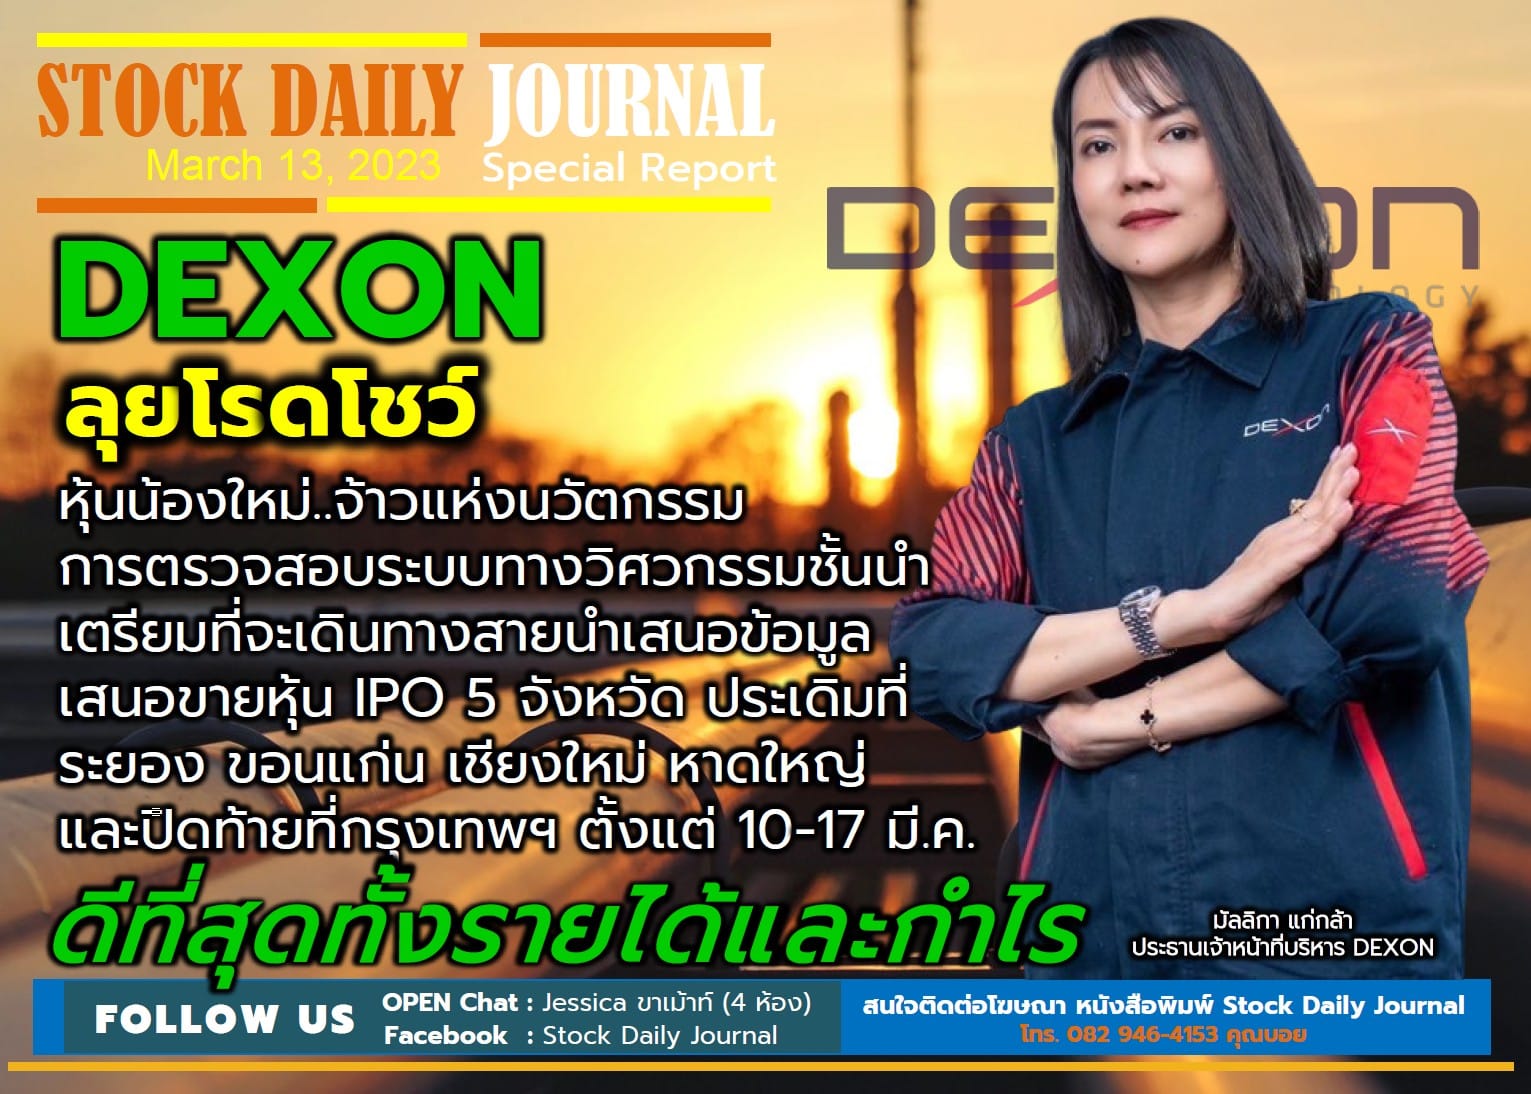 STOCK DAILY JOURNAL “Special Report : DEXON”